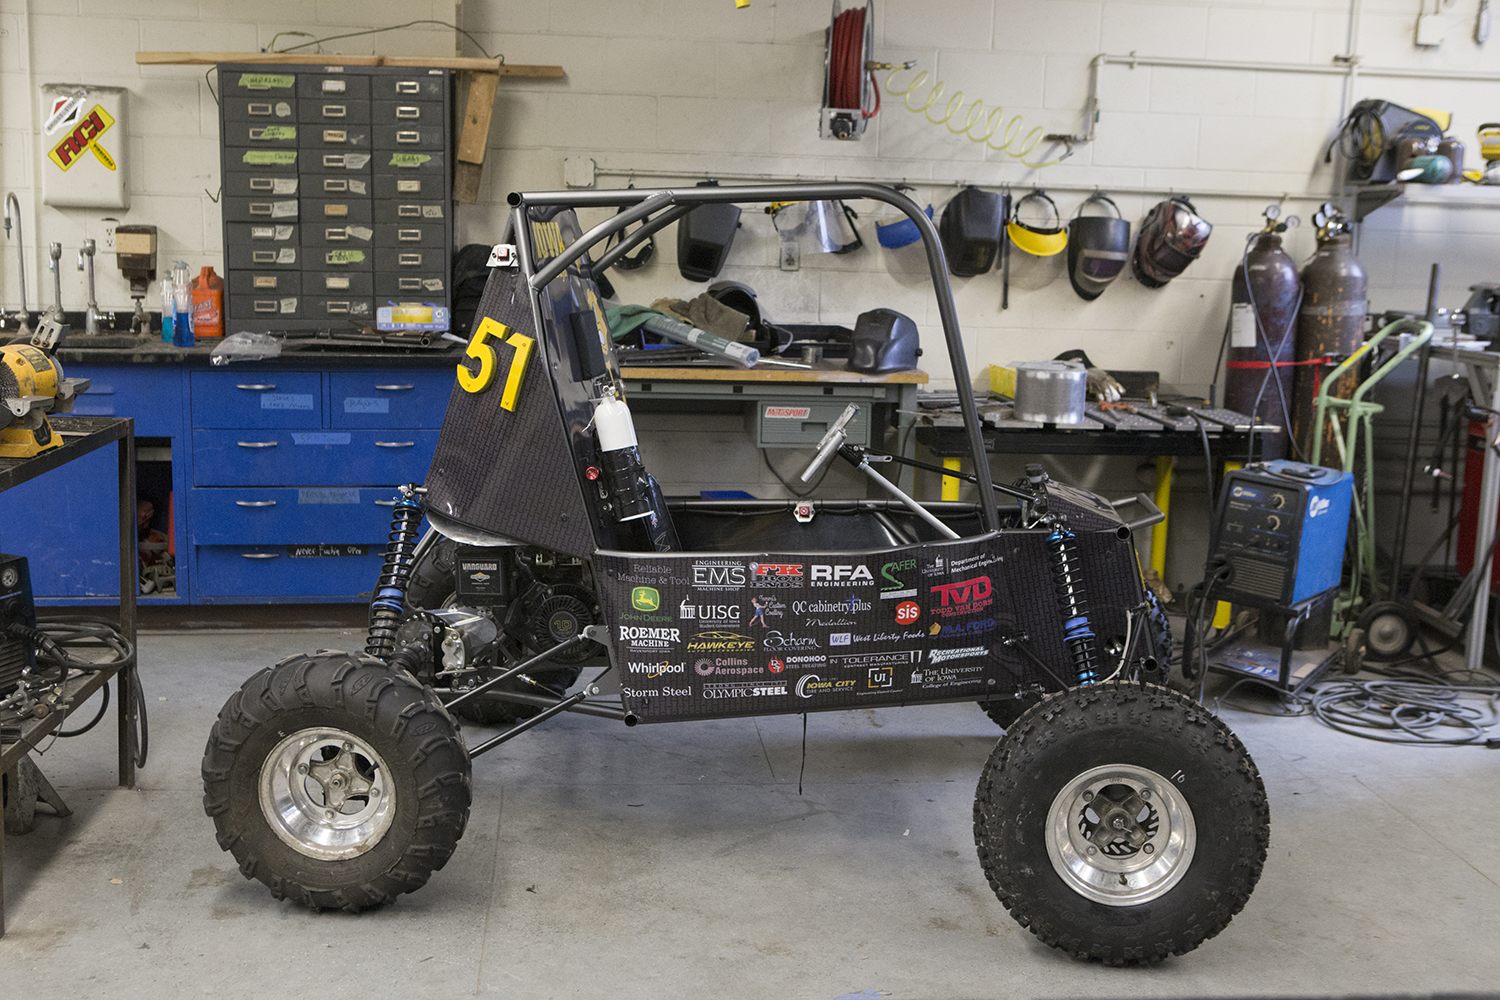 Iowa Baja shows off newest off-road vehicle for national competition in